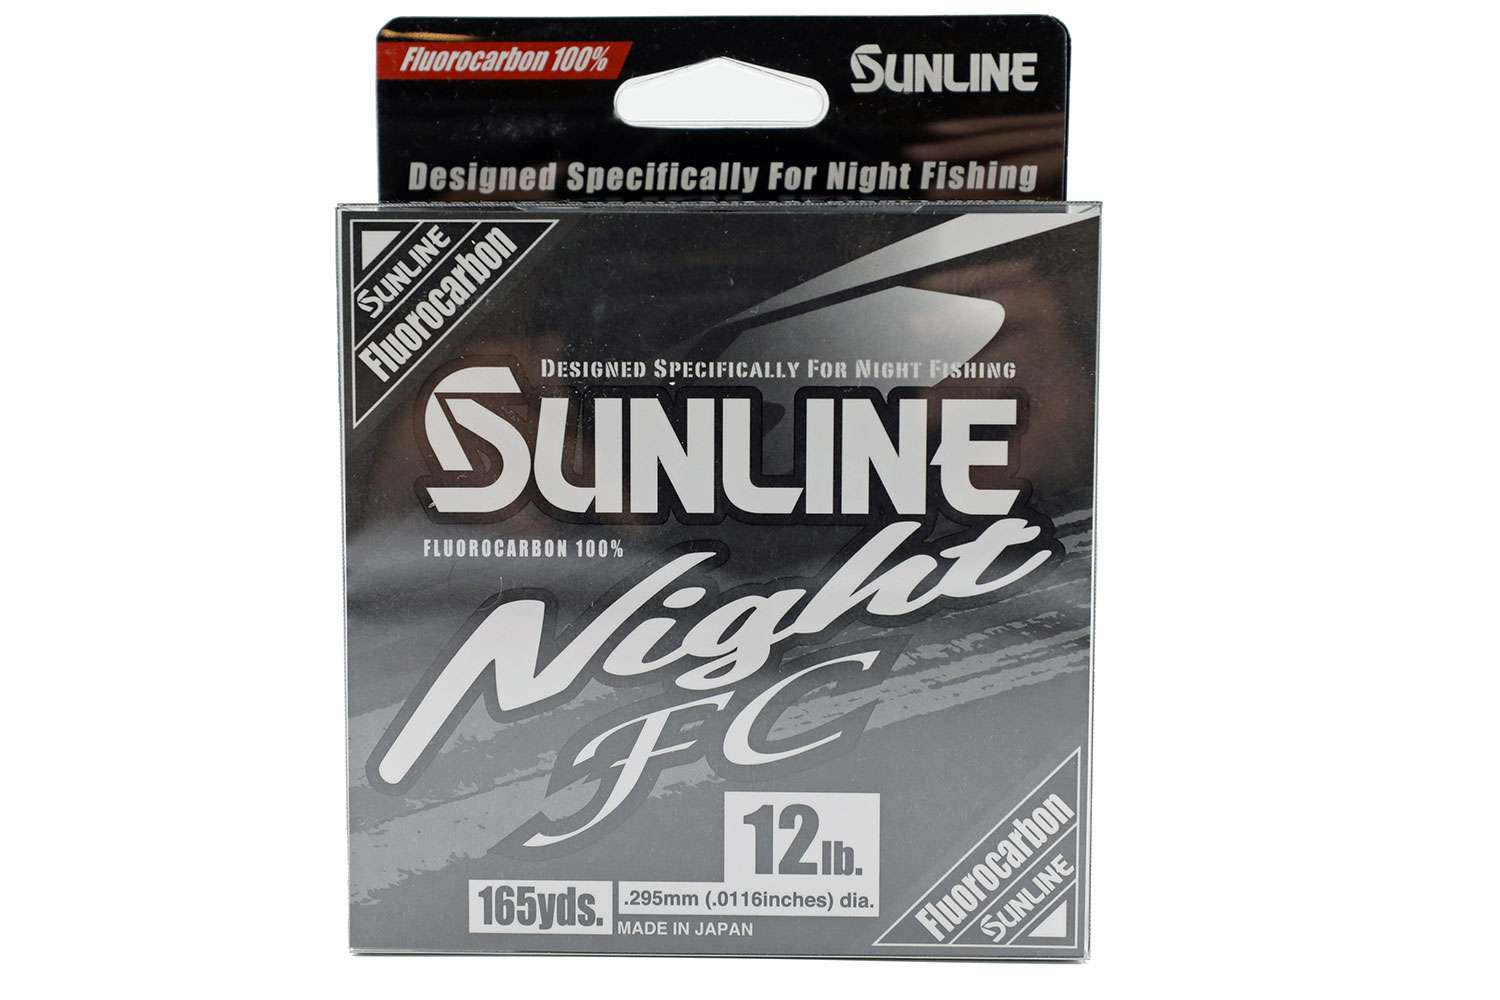  <B> Sunline Night FC</B>
<BR>Sunline will be lighting up the night this summer with the release of their new Night FC. The new Night FC provides a fluorocarbon option for anglers who enjoy fishing for their favorite species after dark. For years, only nylon lines were available in high visibility colors that were visible under black lights. New for 2019, Sunline has designed the ultimate night fishing fluorocarbon line. Night FC is 100-percent fluorocarbon providing all the benefits of fluorocarbon lines like high abrasion resistance, lower stretch and greater sensitivity while featuring a high visibility blue coloring. The blue coloring glows under black light for easy visibility during night or day. Night FC comes in a 165-yard spool and is available in 12-, 15-, 17-, 20- and 25-pound tests.
<BR>
<B>MSRP: $21.99 - $22.99</B>
